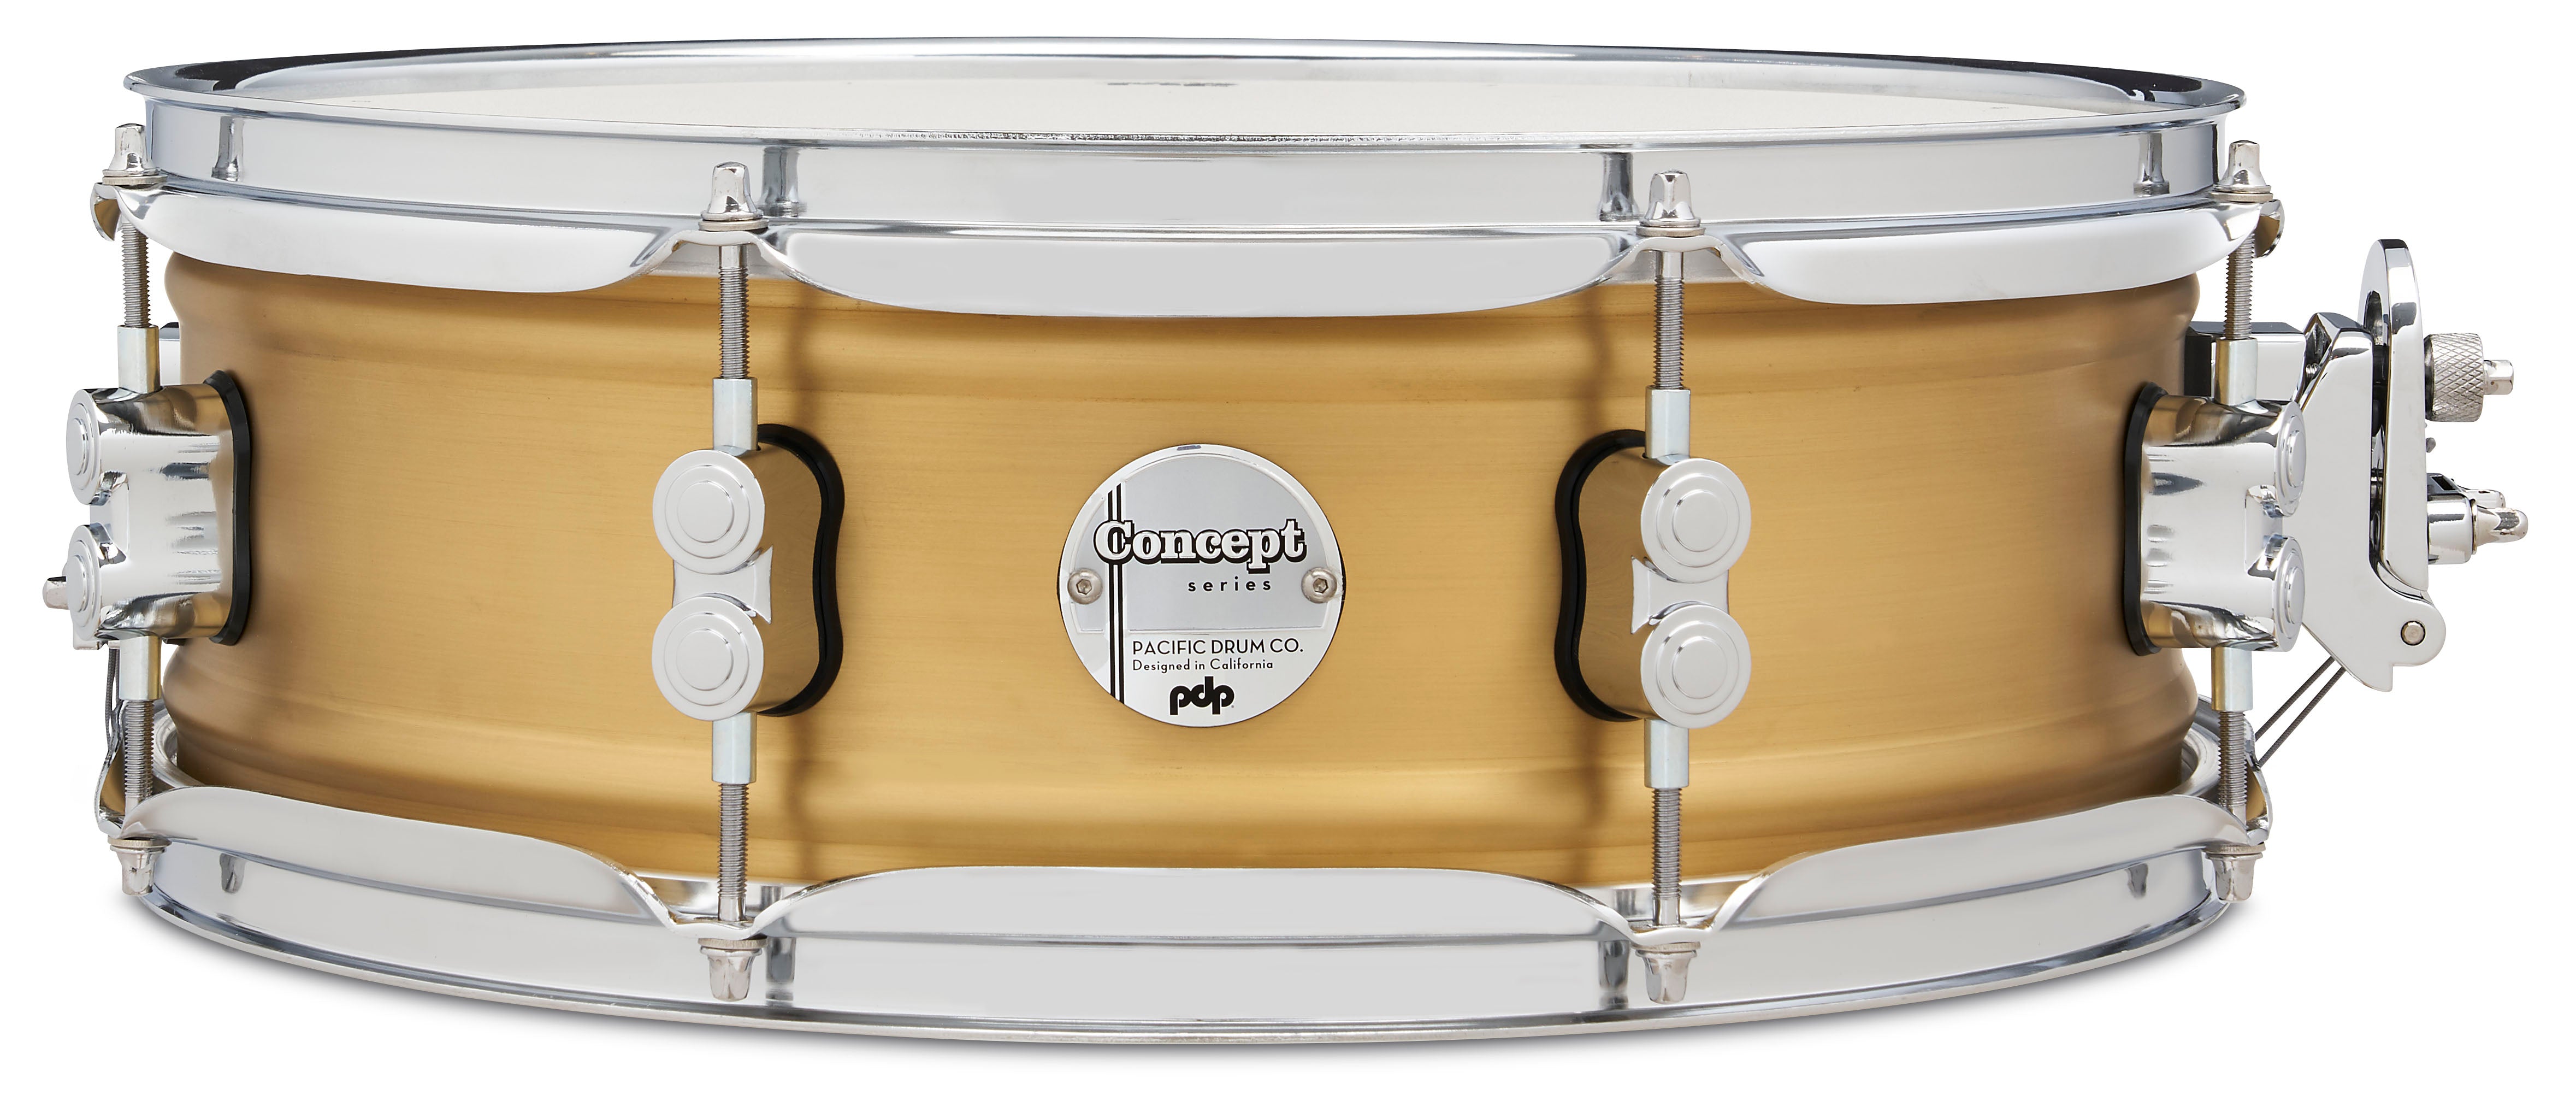 PDP Concept Series Snare Drum 5" x 14" Aluminum Snare Drum - Natural Satin Brushed Brass w/ Chrome Hardware